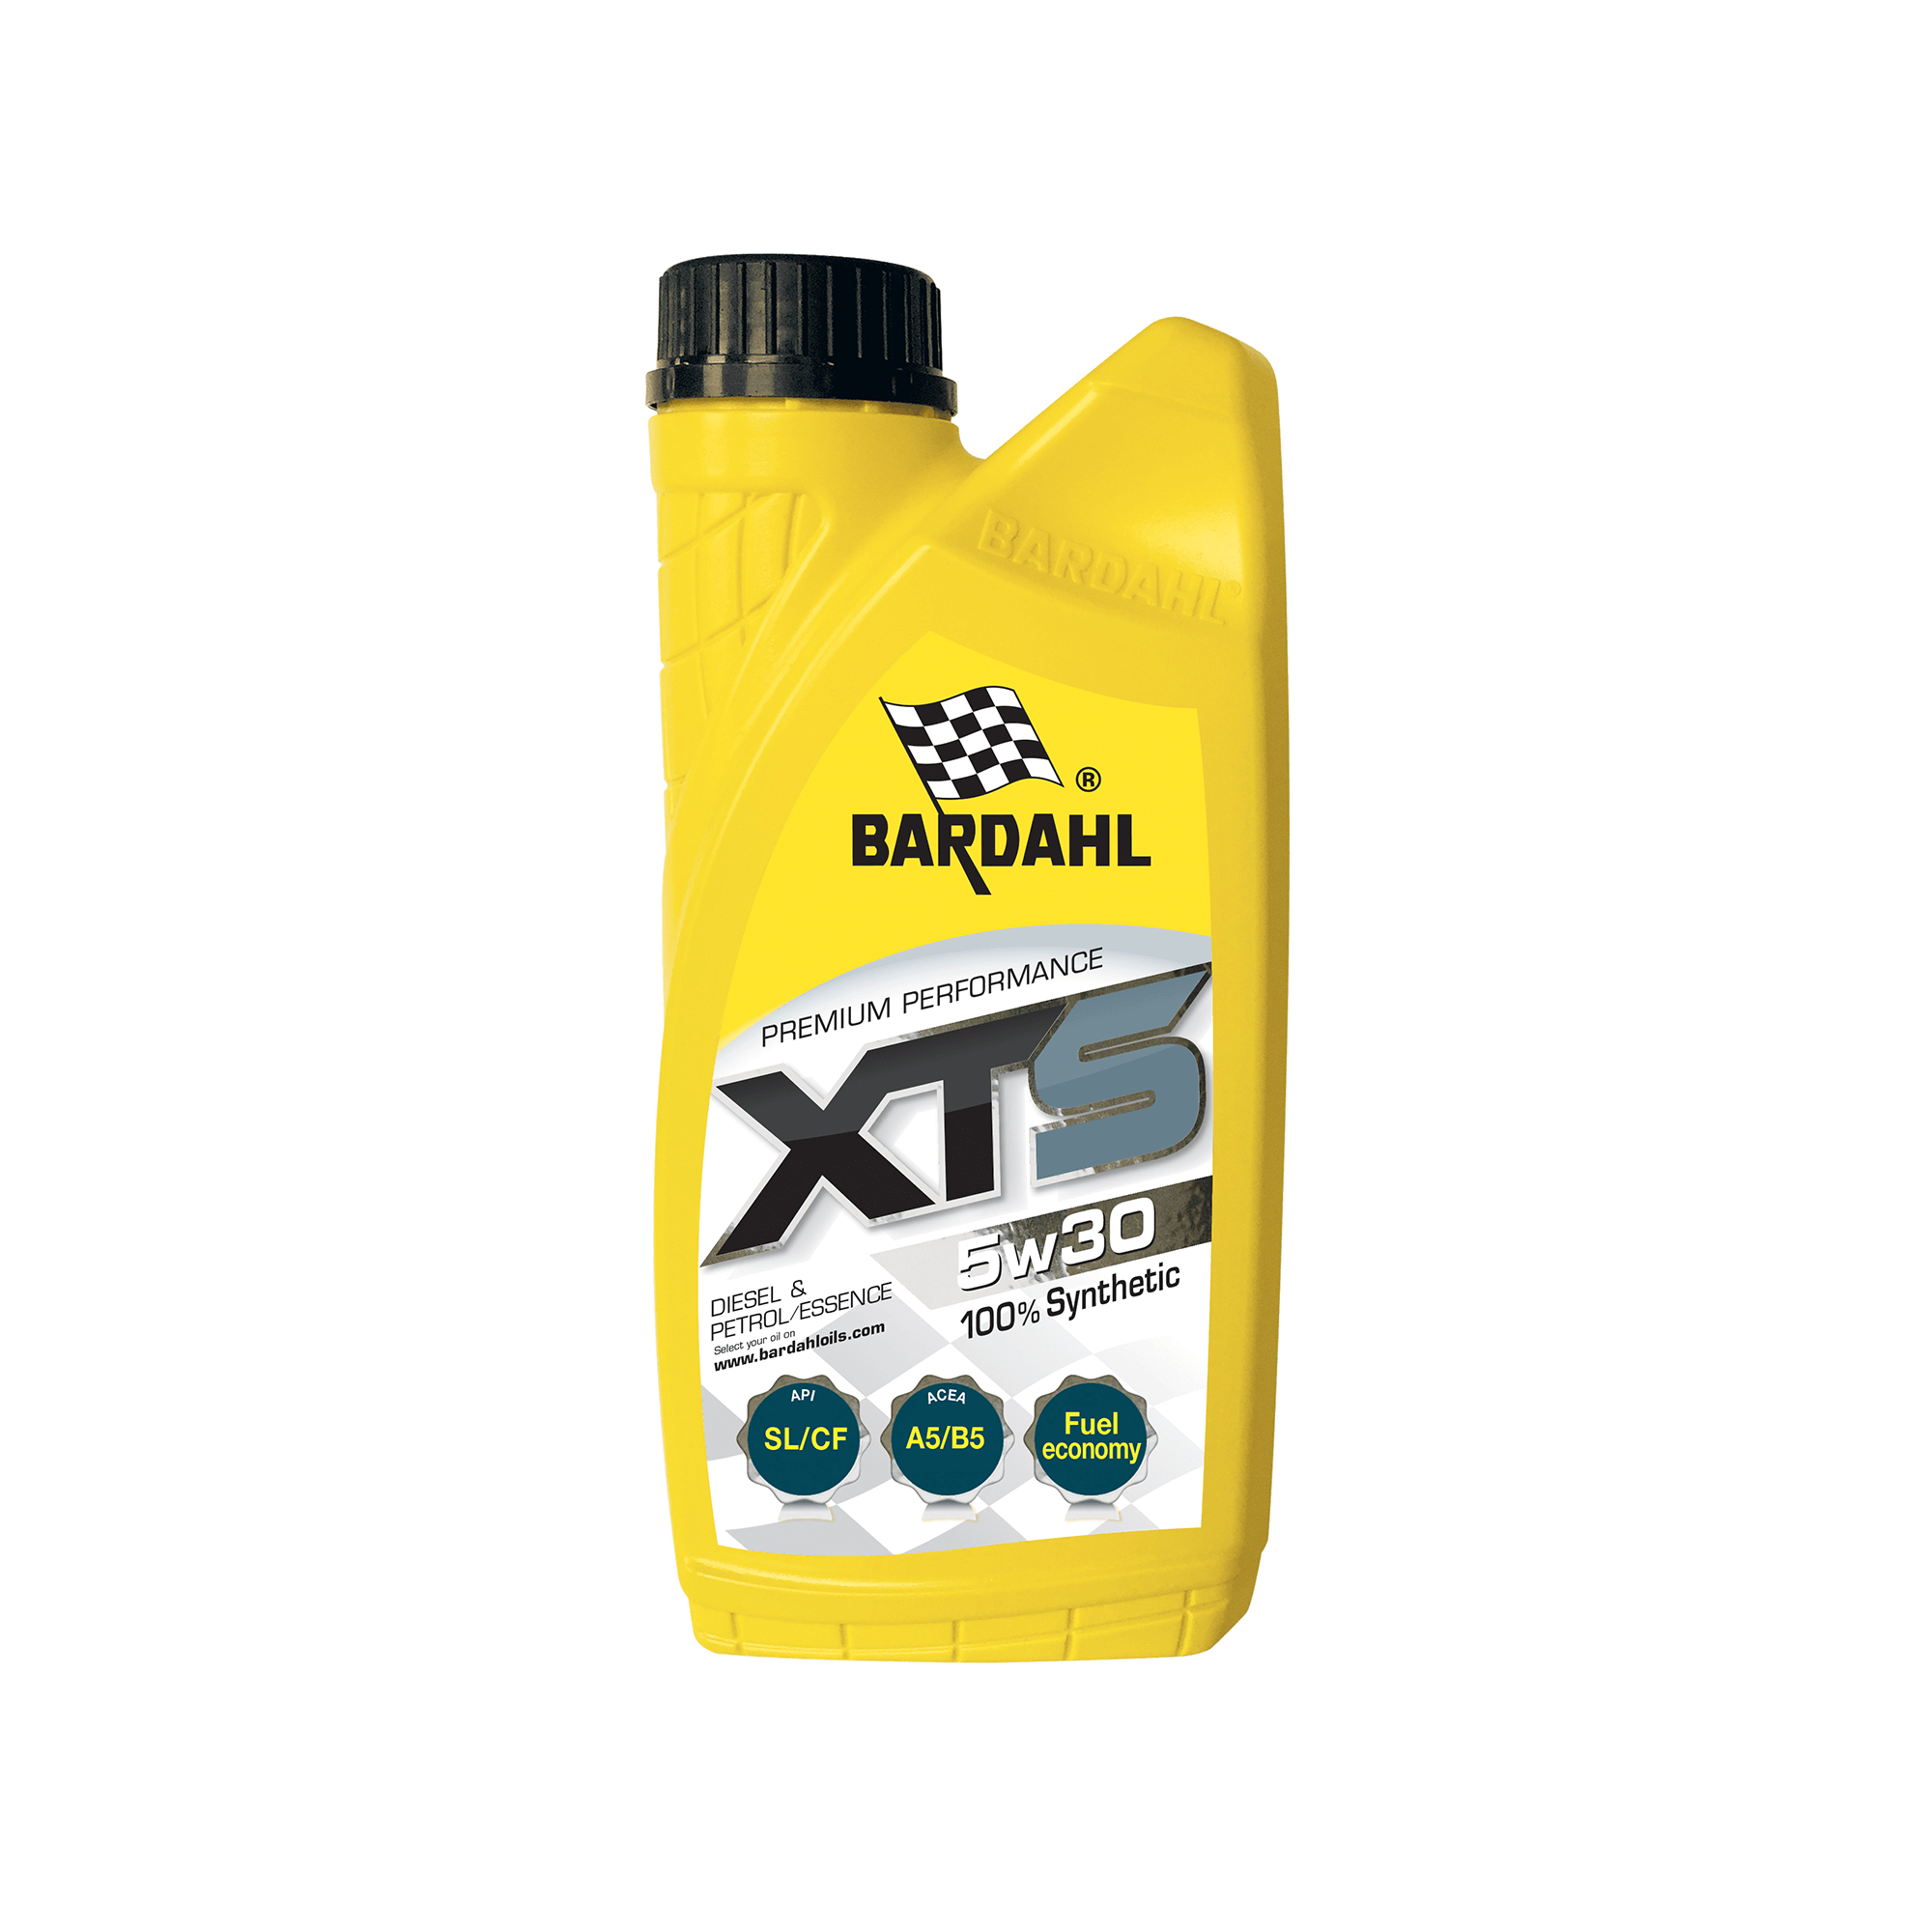 Bardahl XTS 5W30 1L Engine Oil, Engine lubricant, Engine cleaner